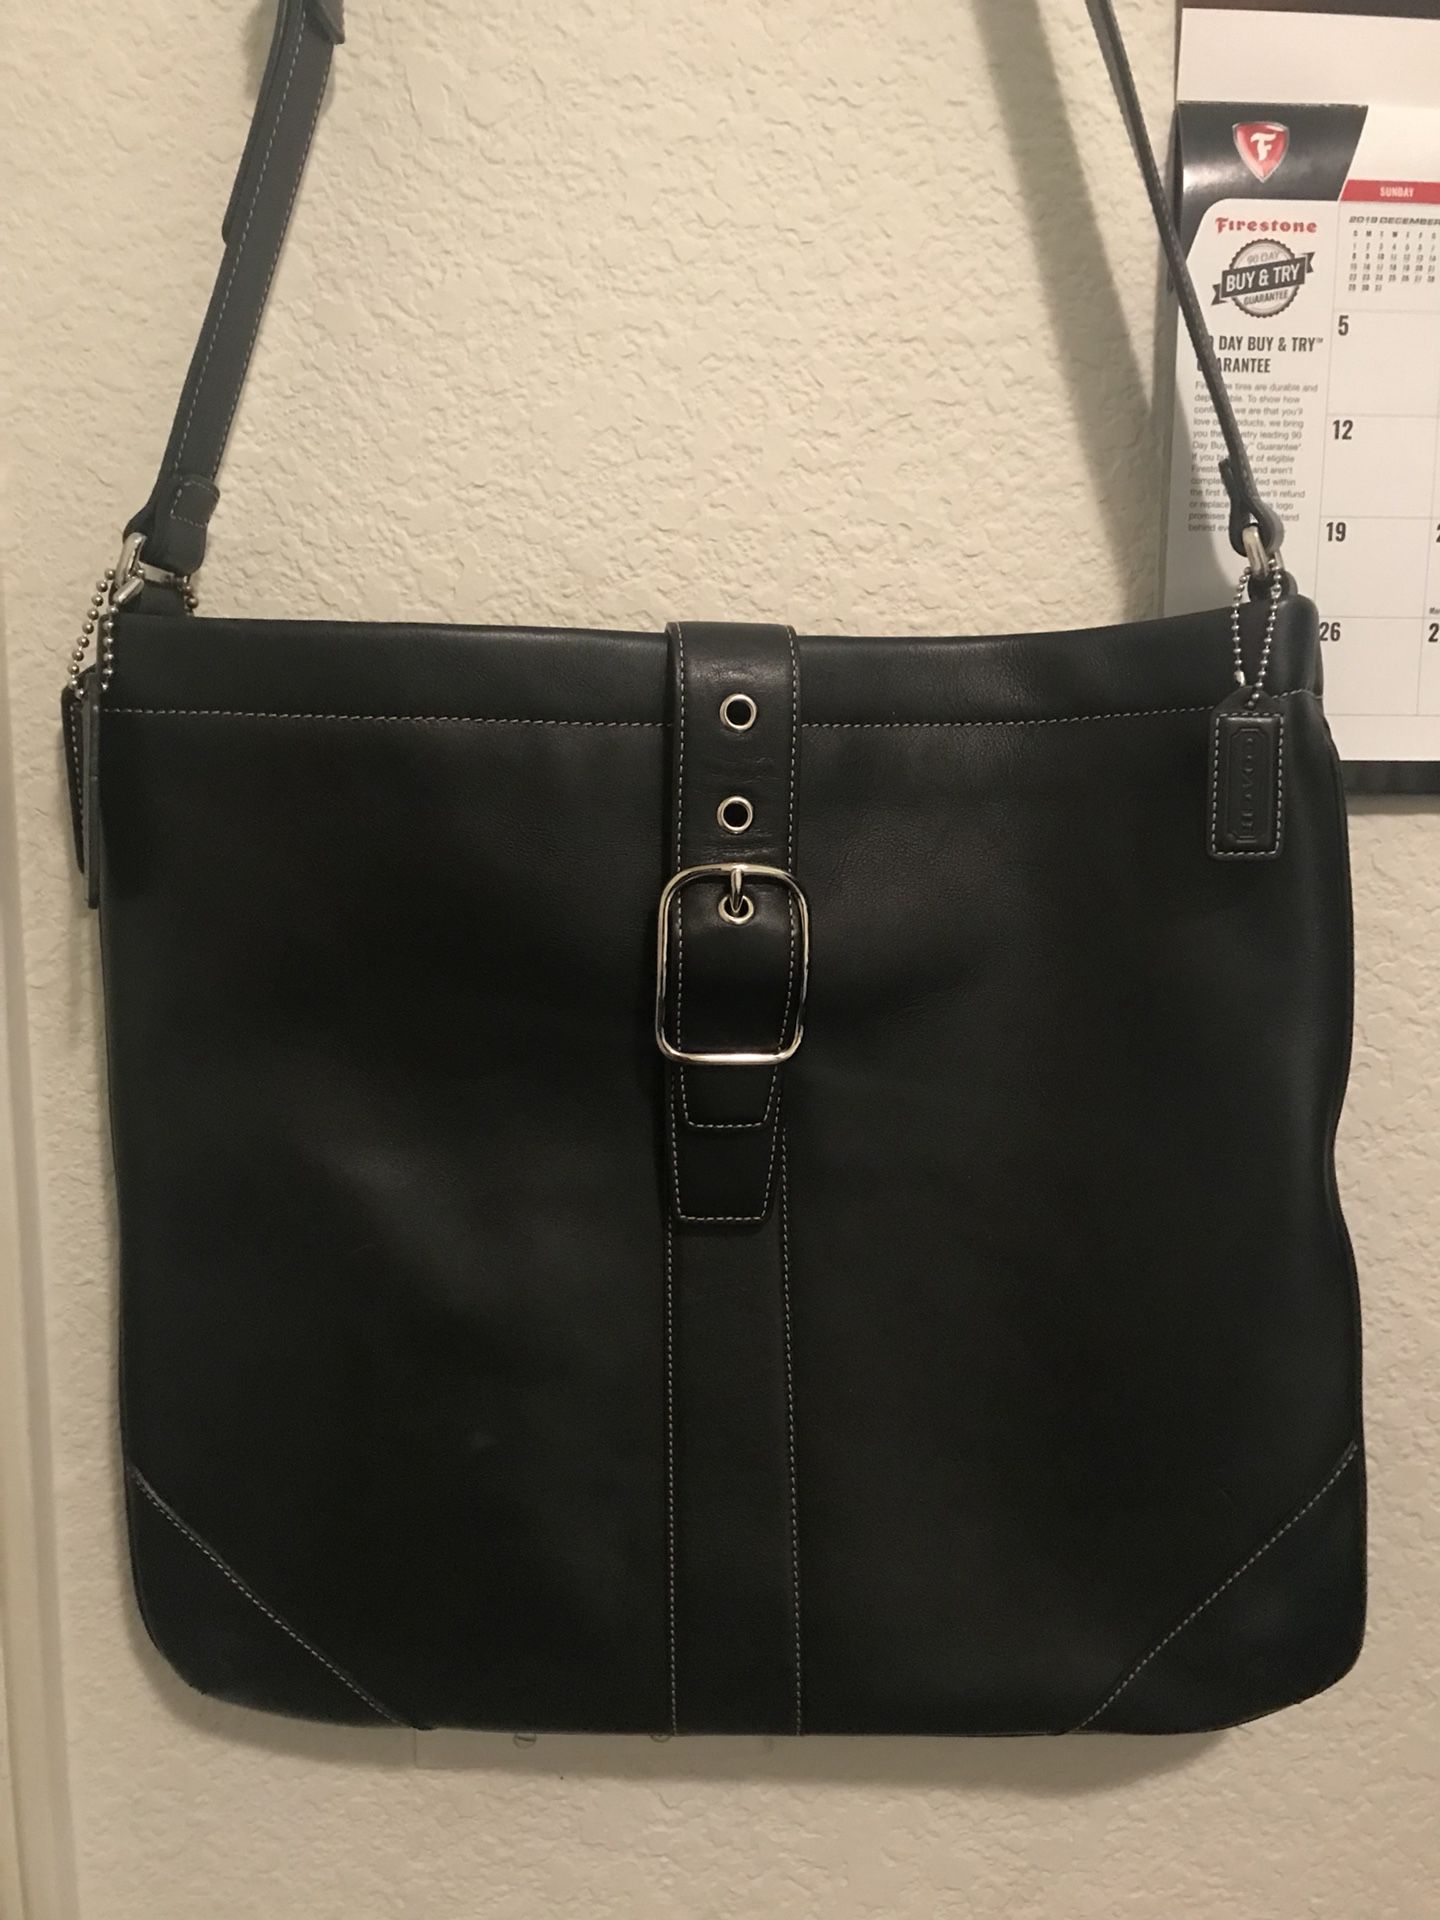 Coach Black purse or messenger bag 13 1/2 x 15 In great condition in and out $60 pick up only